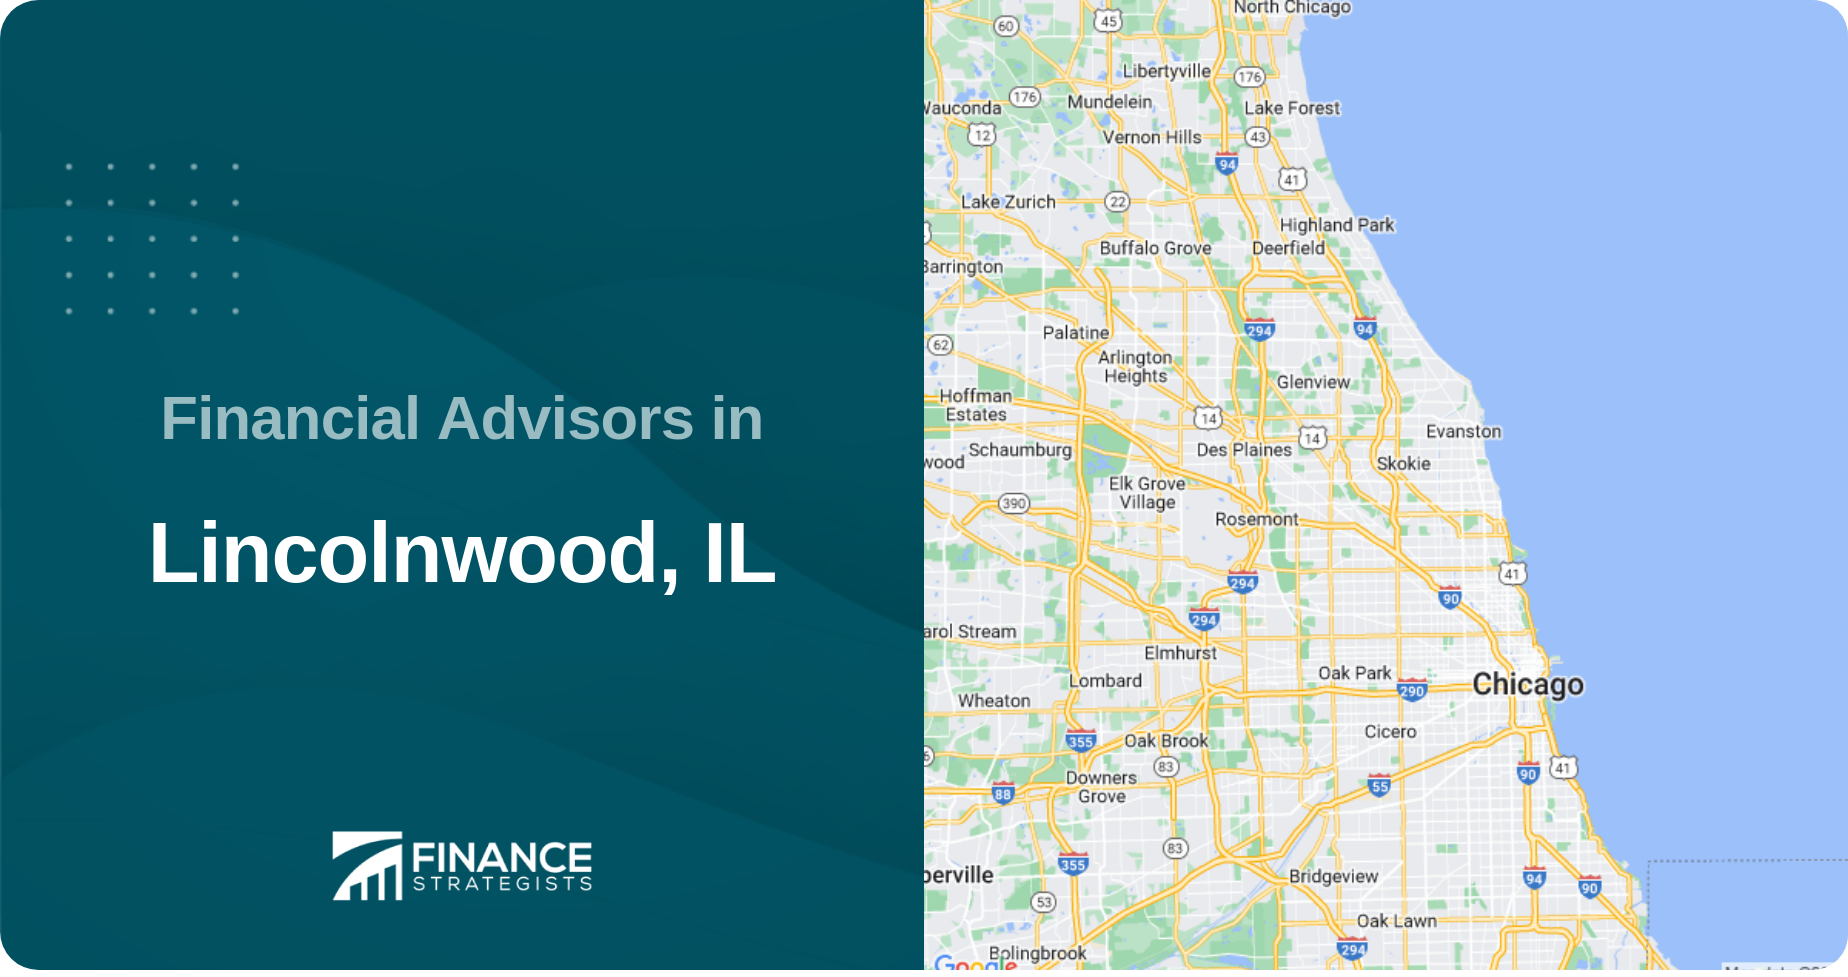 Financial Advisors in Lincolnwood, IL